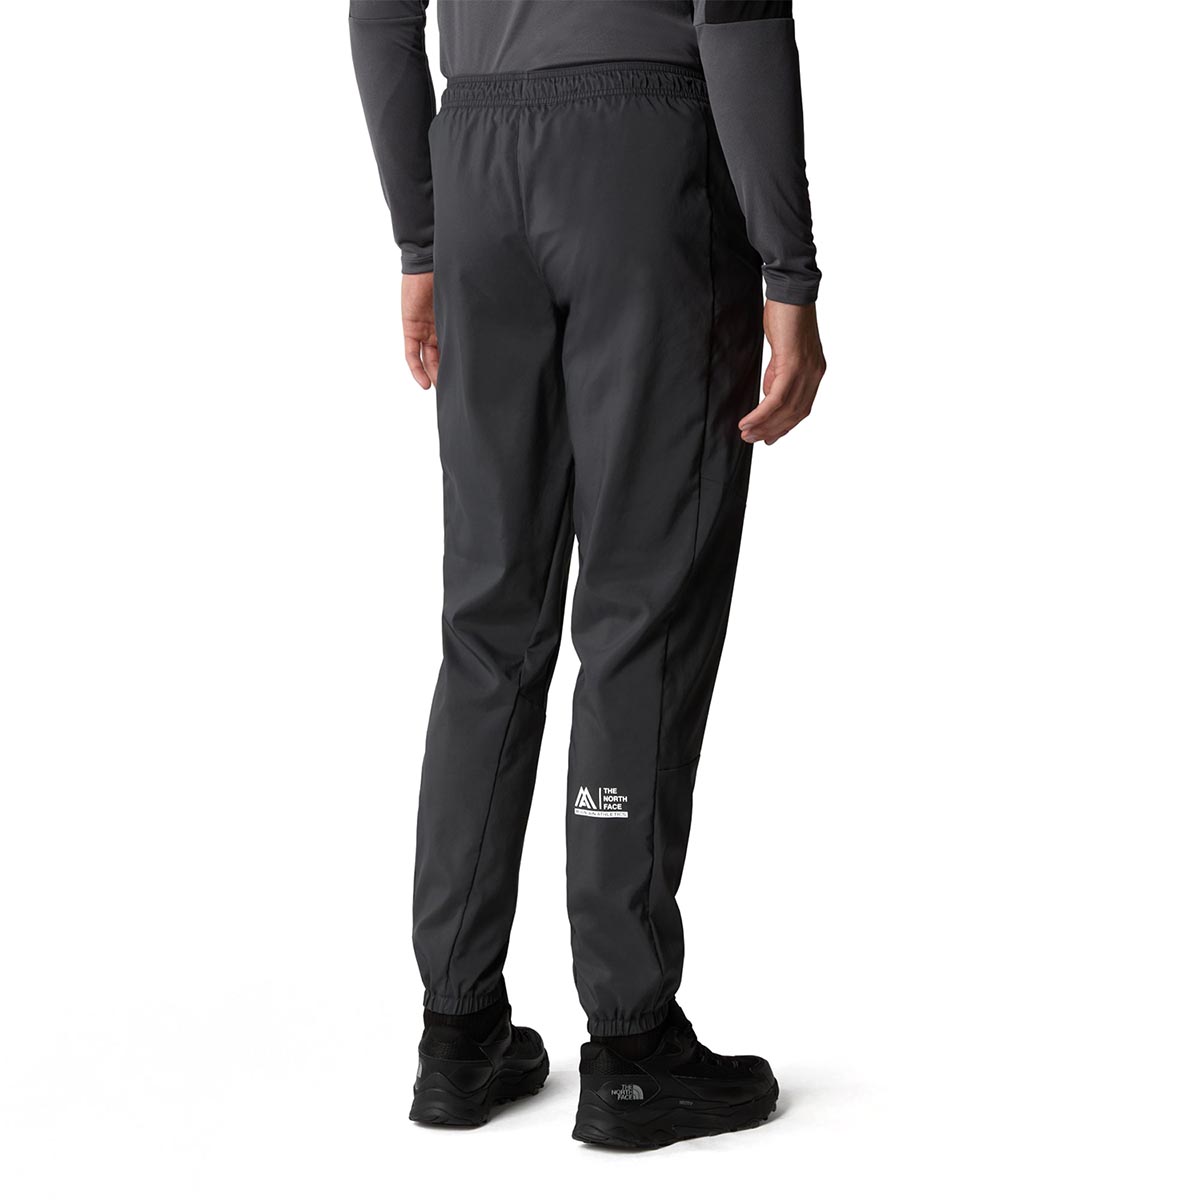 THE NORTH FACE - MOUNTAIN ATHLETICS WIND TRACK